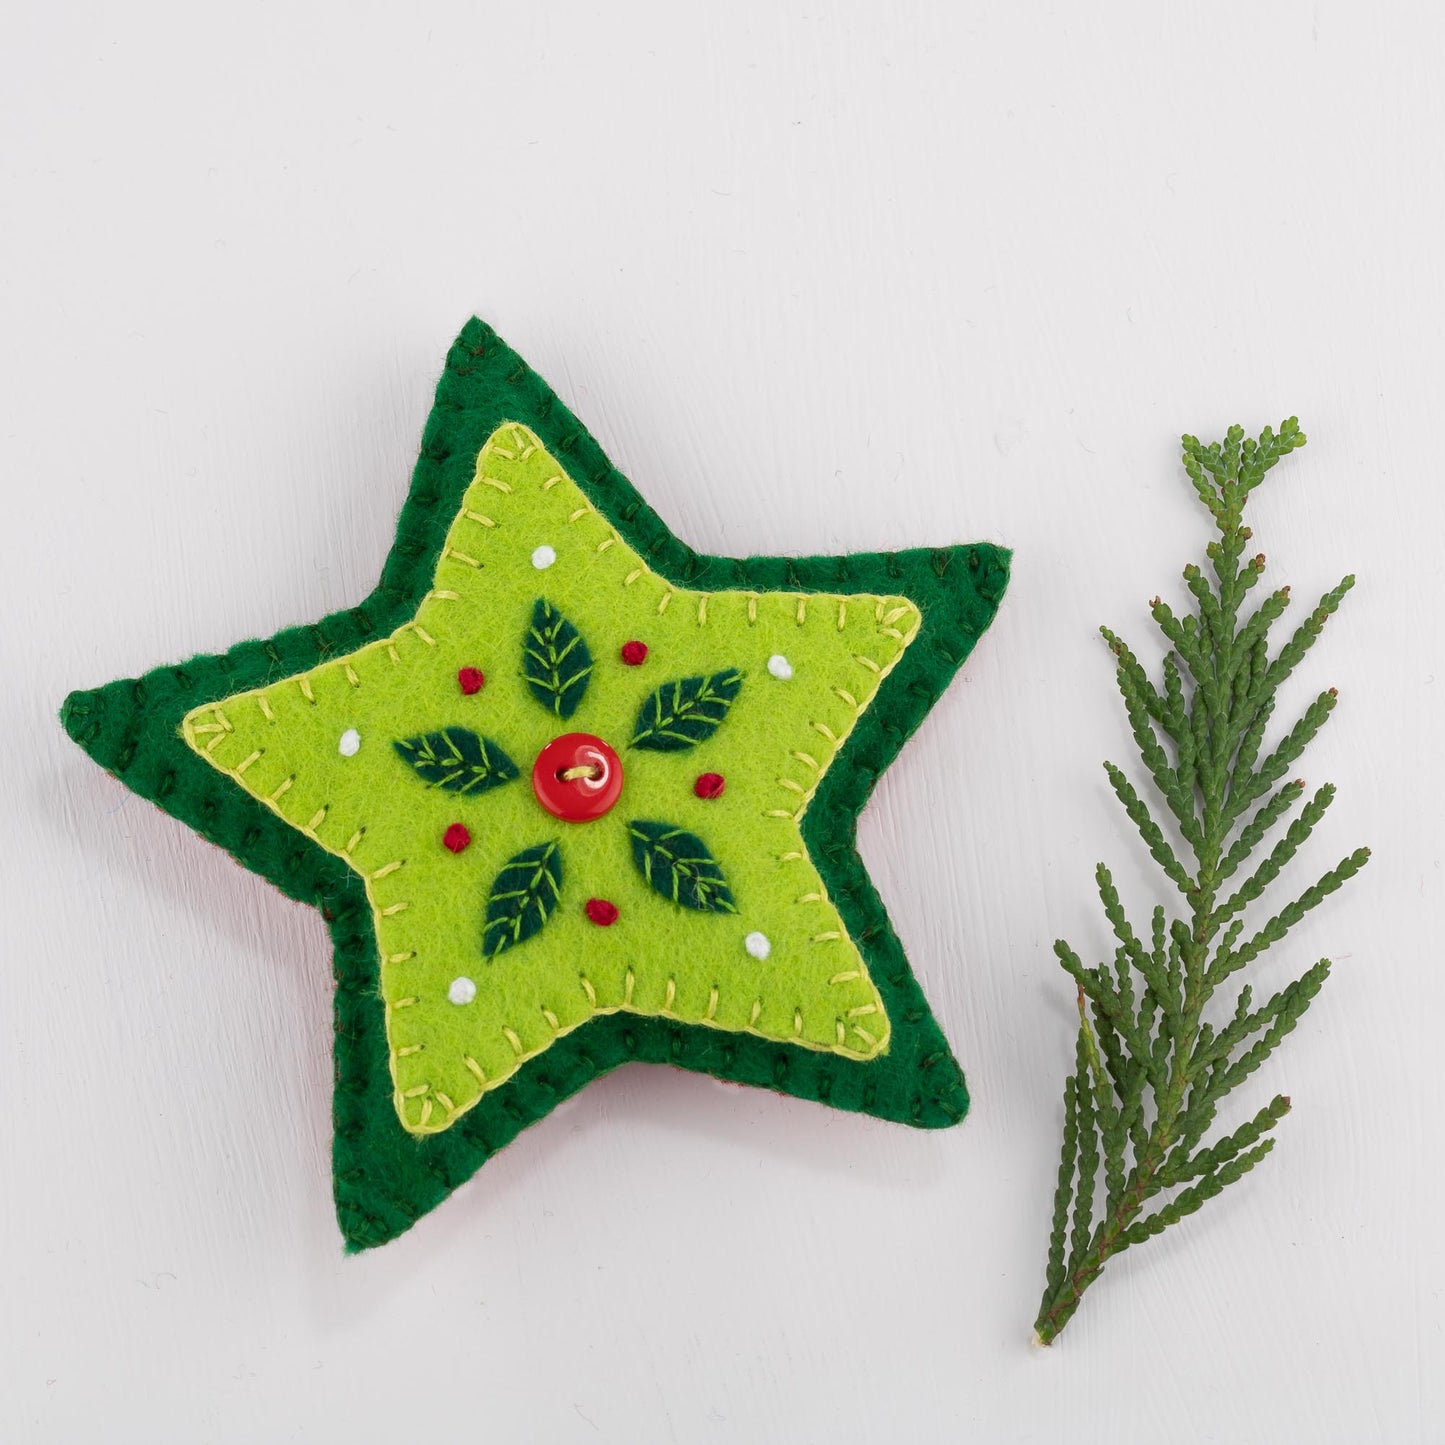 Star Christmas Ornament in Red and Green